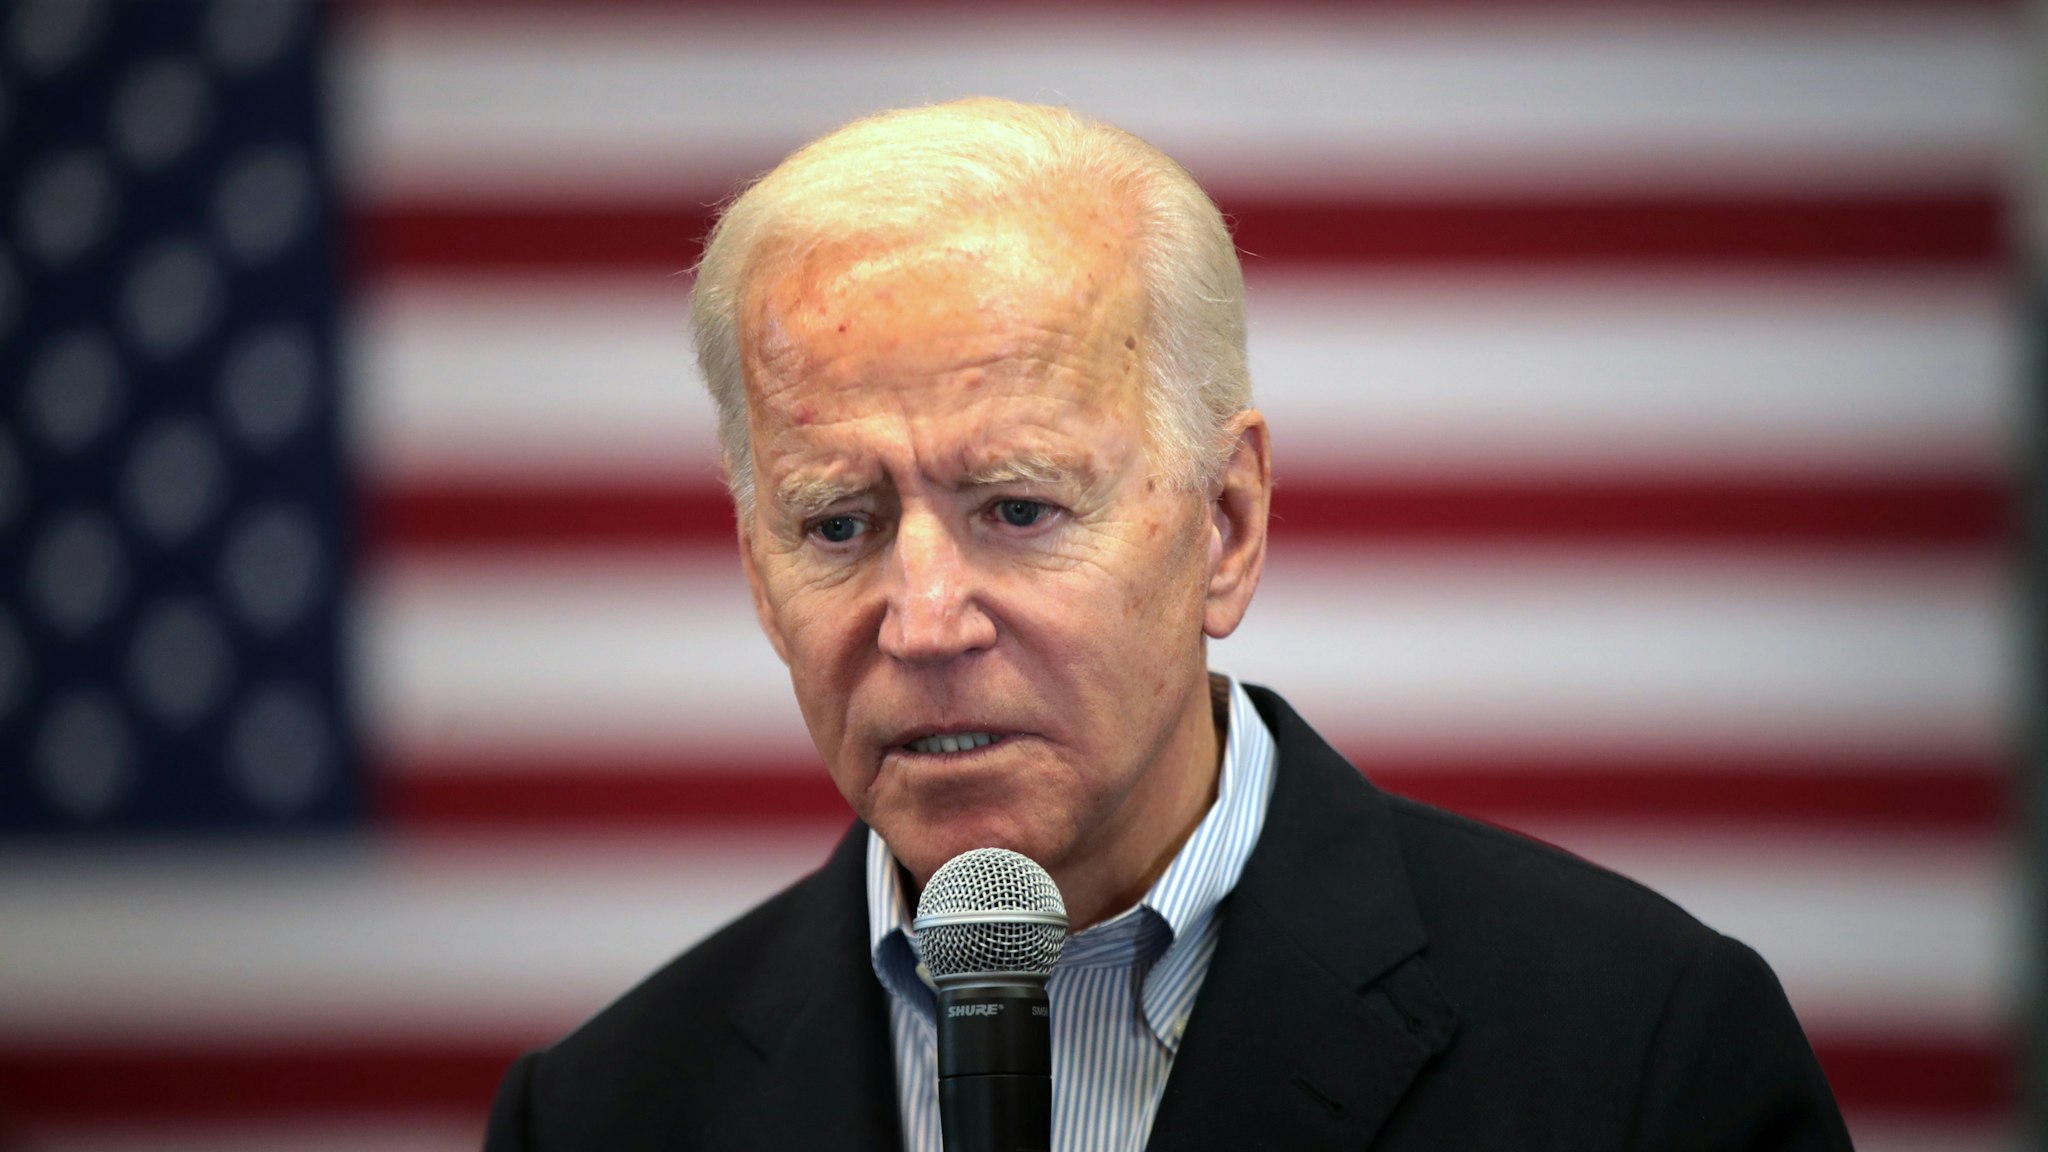 ALGONA, IOWA - DECEMBER 02: Democratic presidential candidate, former Vice President Joe Biden speaks during a campaign stop at the Water's Edge Nature Center on December 2, 2019 in Algona, Iowa. The stop was part of Biden's 650-mile "No Malarkey" campaign bus trip through rural Iowa. The 2020 Iowa Democratic caucuses will take place on February 3, 2020, making it the first nominating contest for the Democratic Party in choosing their presidential candidate to face Donald Trump in the 2020 election.